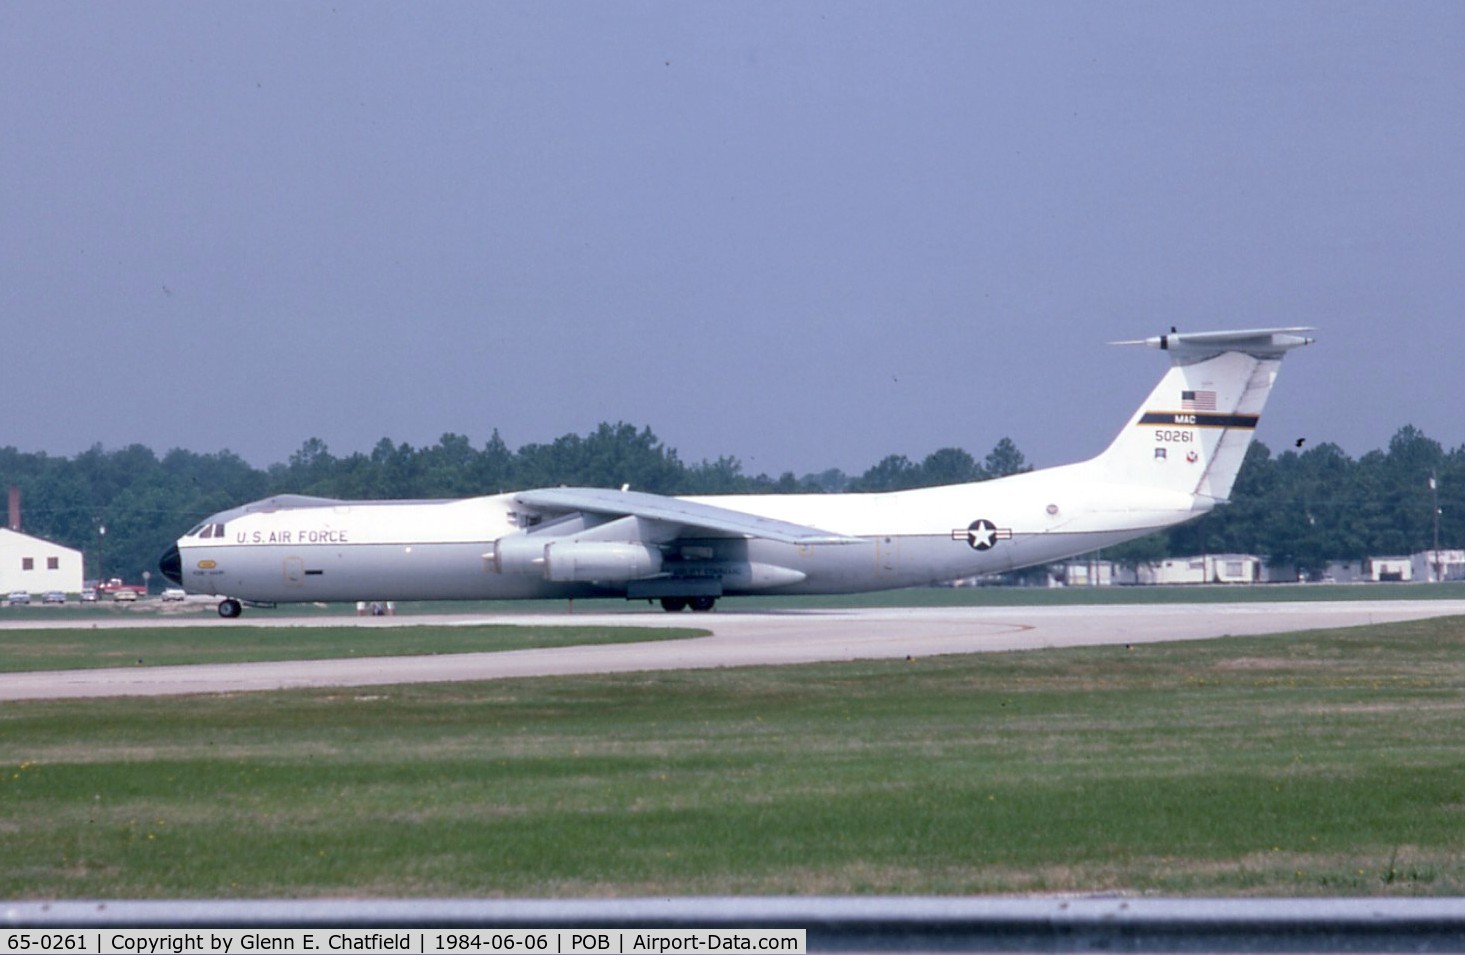 65-0261, 1965 Lockheed C-141B-LM Starlifter C/N 300-6113, C-141B taking the runway for departure